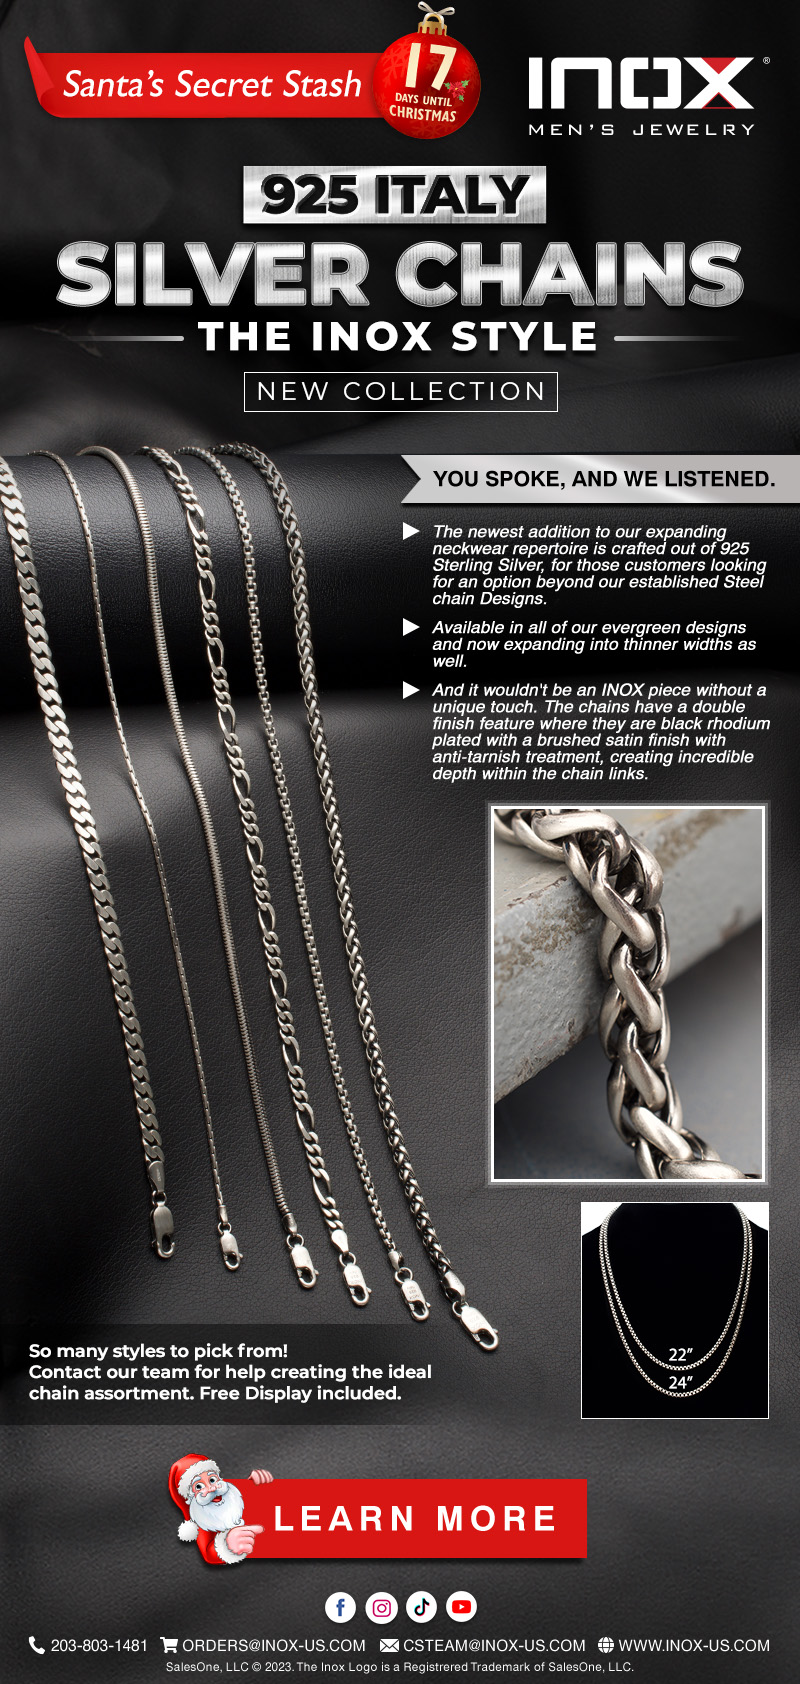 New 925 Italy Silver Chains - The INOX Style